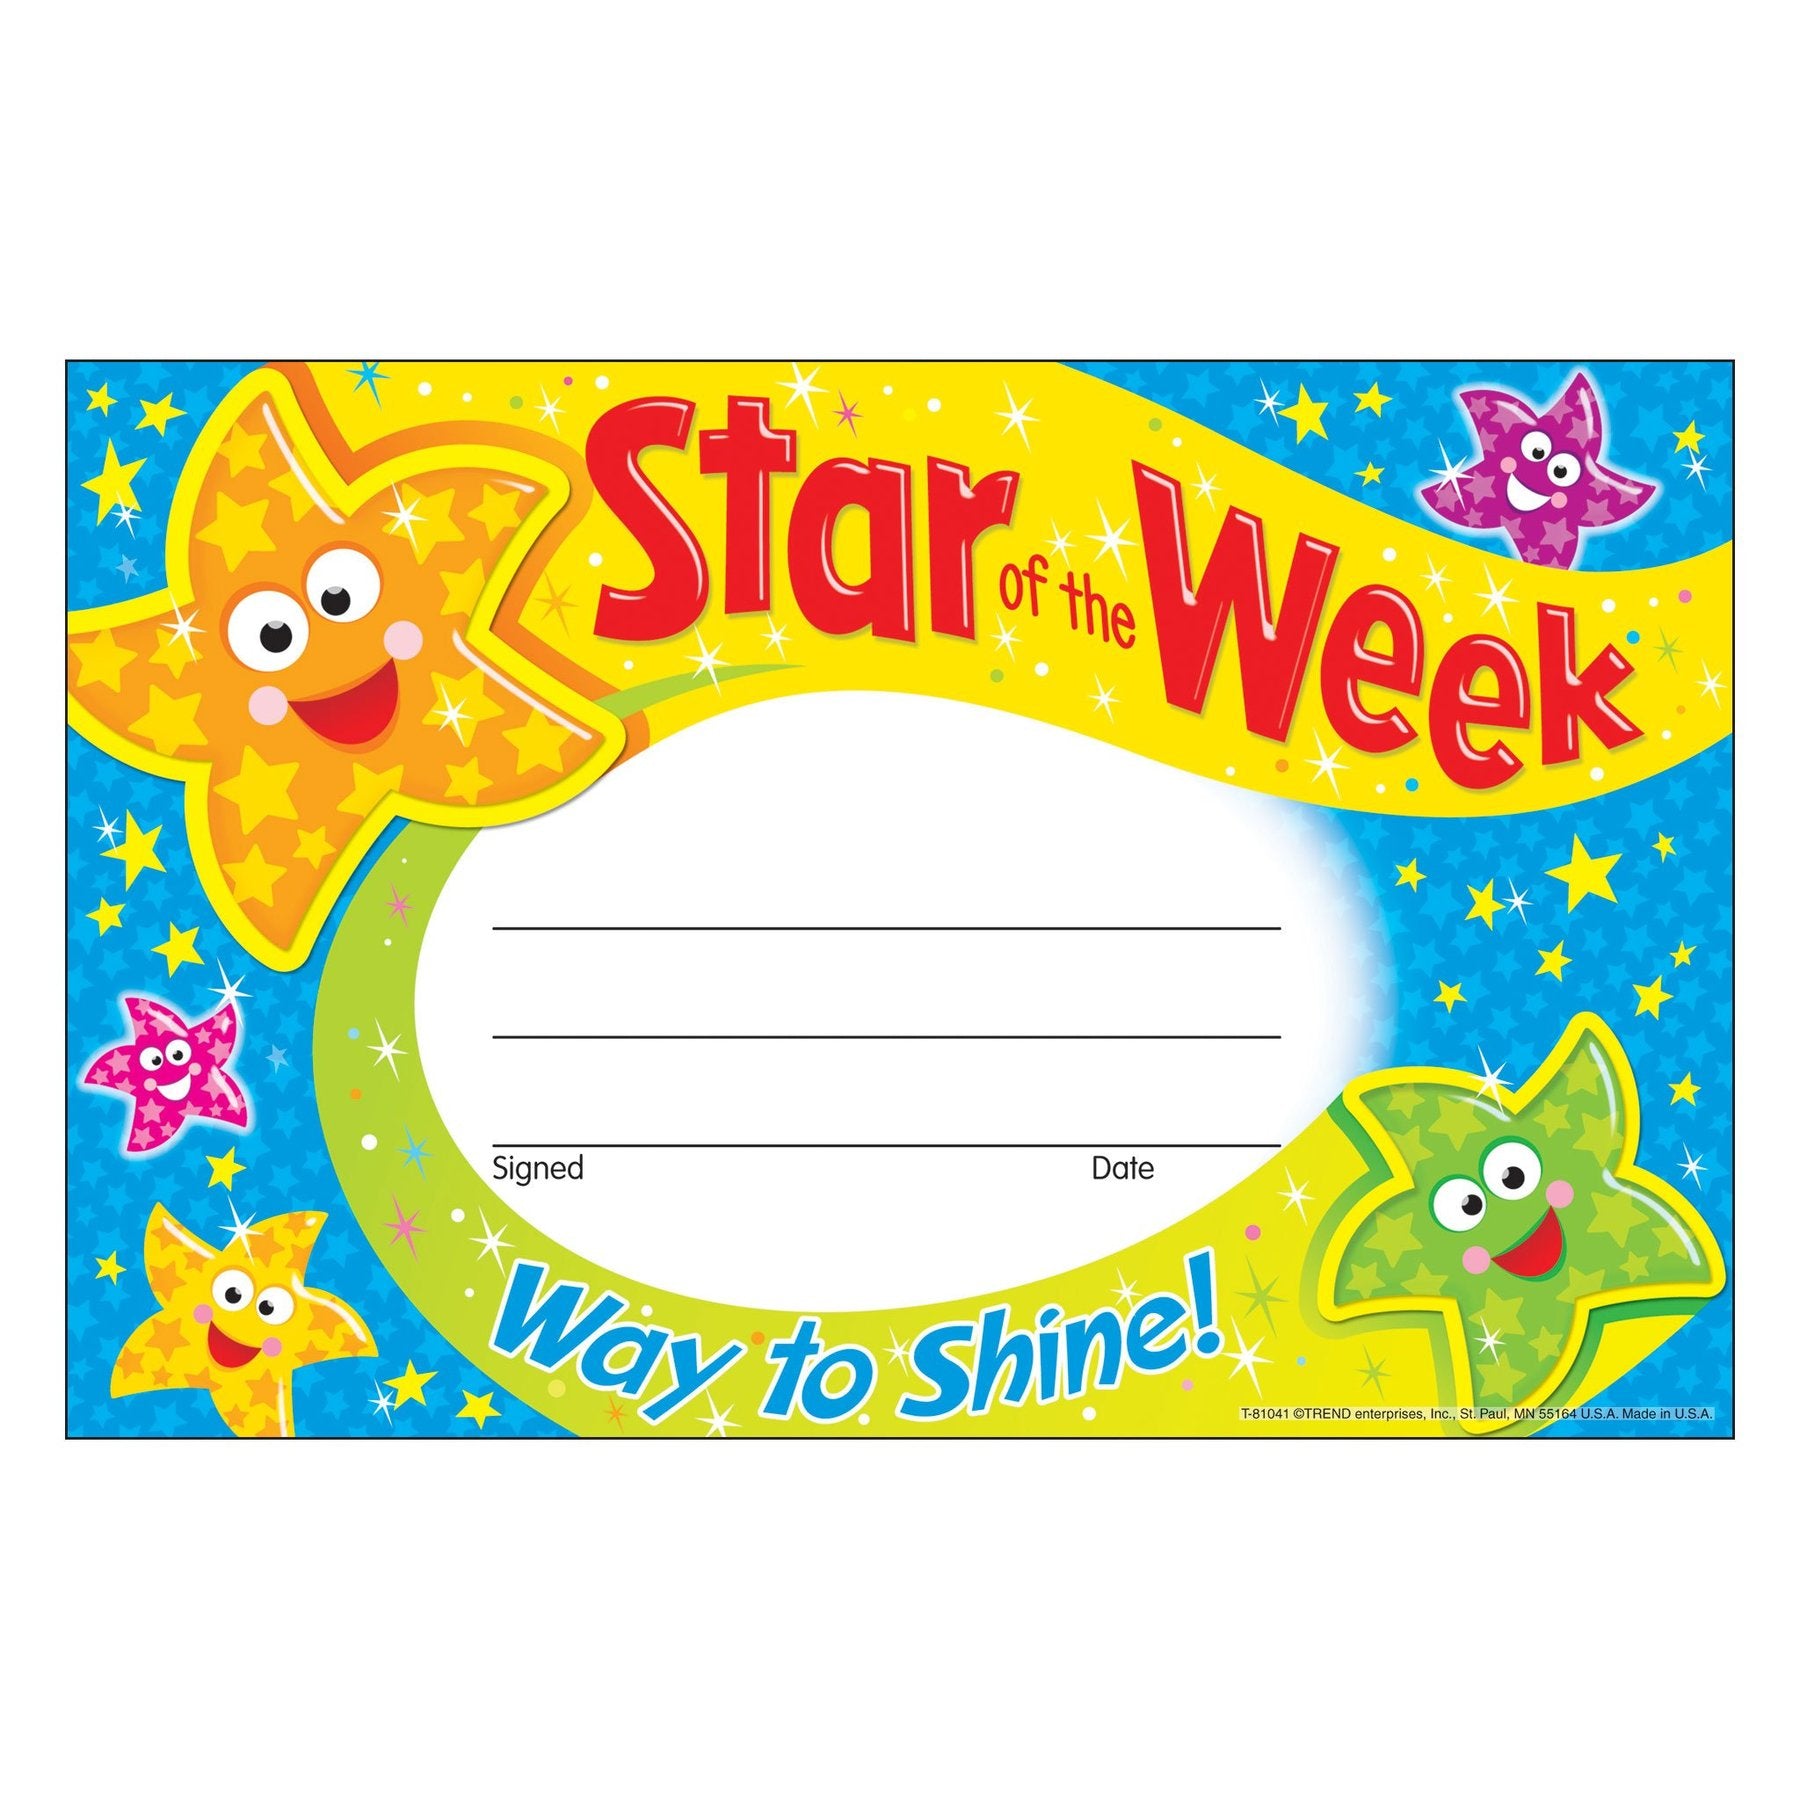 Star of the Week—Way to Shine! Recognition Awards